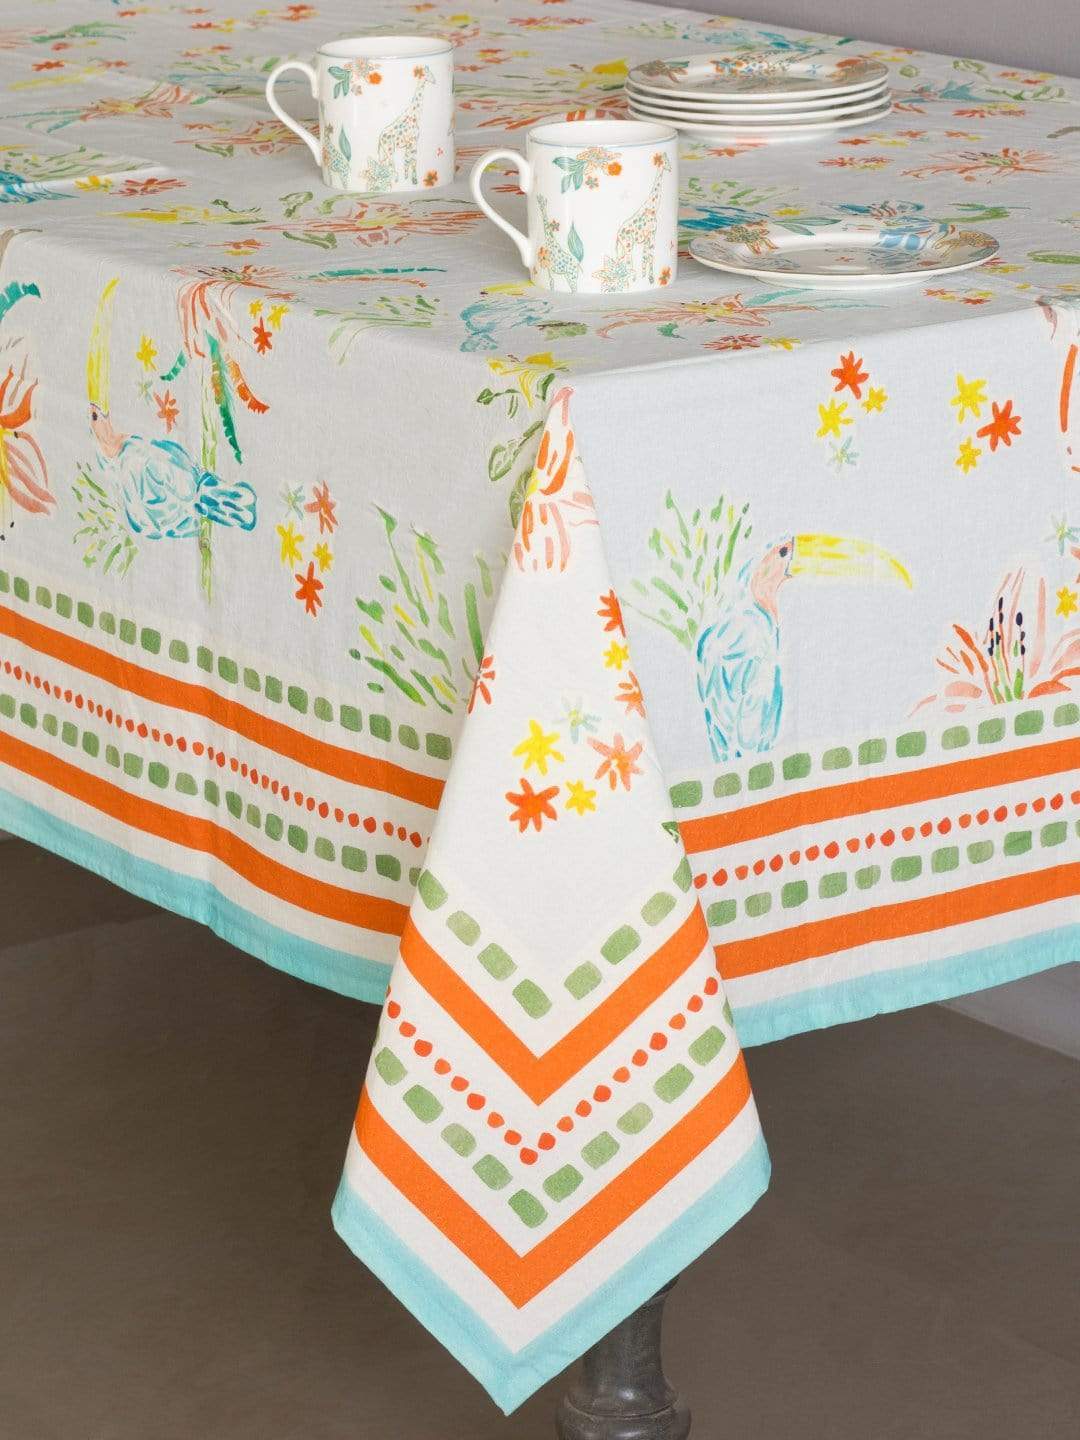 Where The Grass Is Green Table Cover